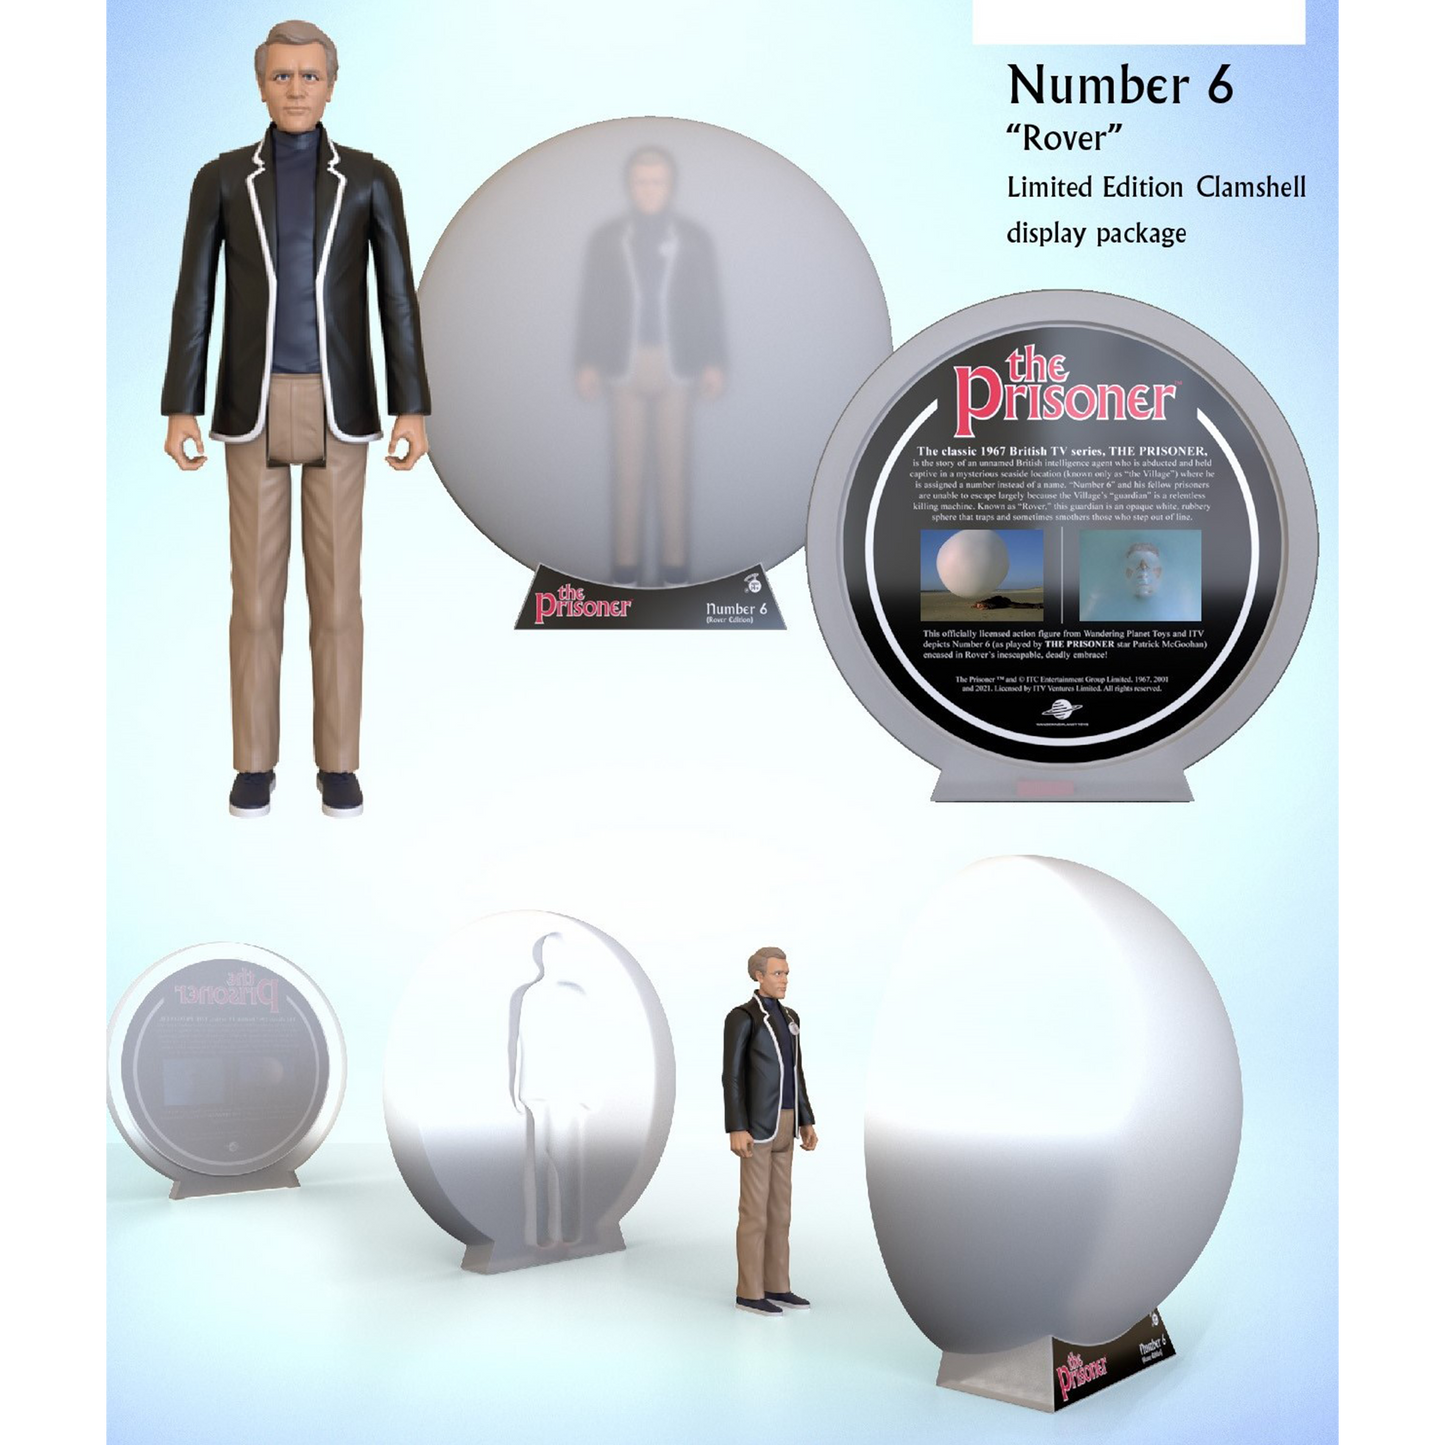 The Prisoner Number 6 (Rover) Limited Edition Package